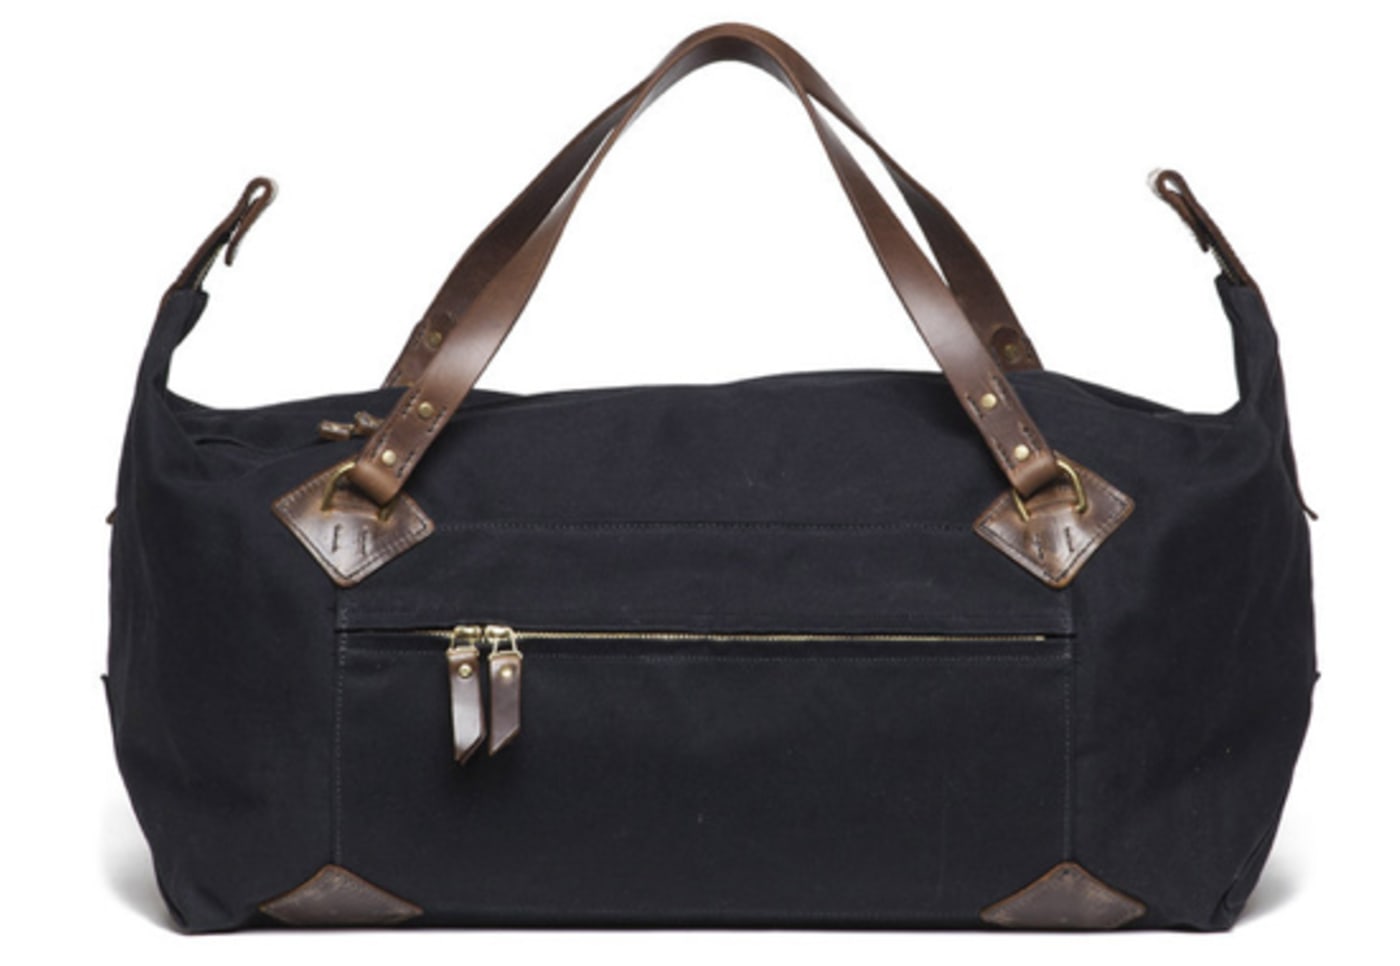 Tanner Goods Has an All-Purpose Duffel That’s Clean and Functional ...